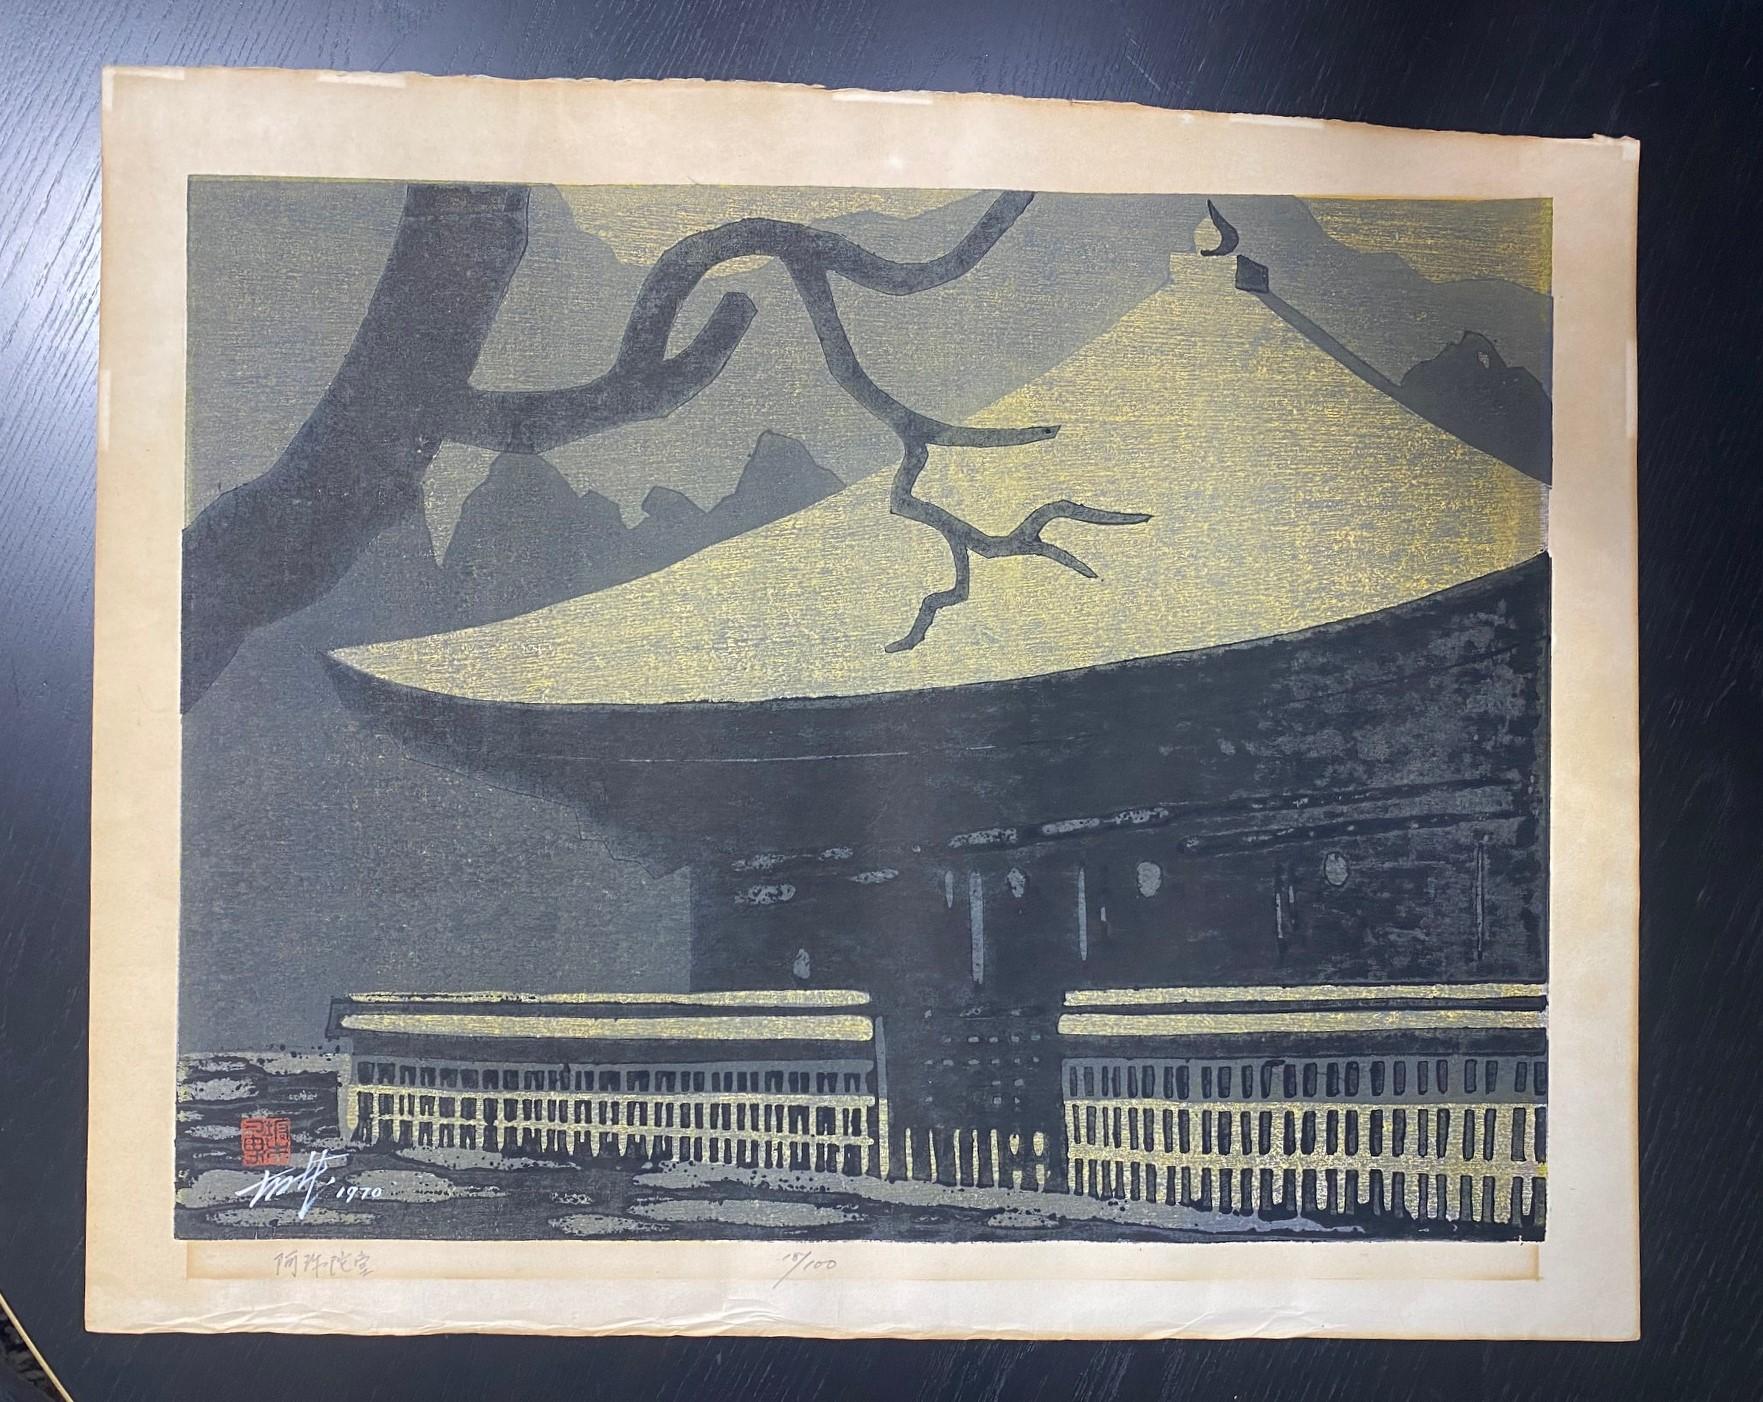 A gorgeous and beautiful organically colored print by Japanese artist/printmaker Isamu Sakamoto. The work features a subdued dawn or dusk light falling on a traditional house or Buddhist/ Shinto temple as a lazy branch stretches across the rooftop